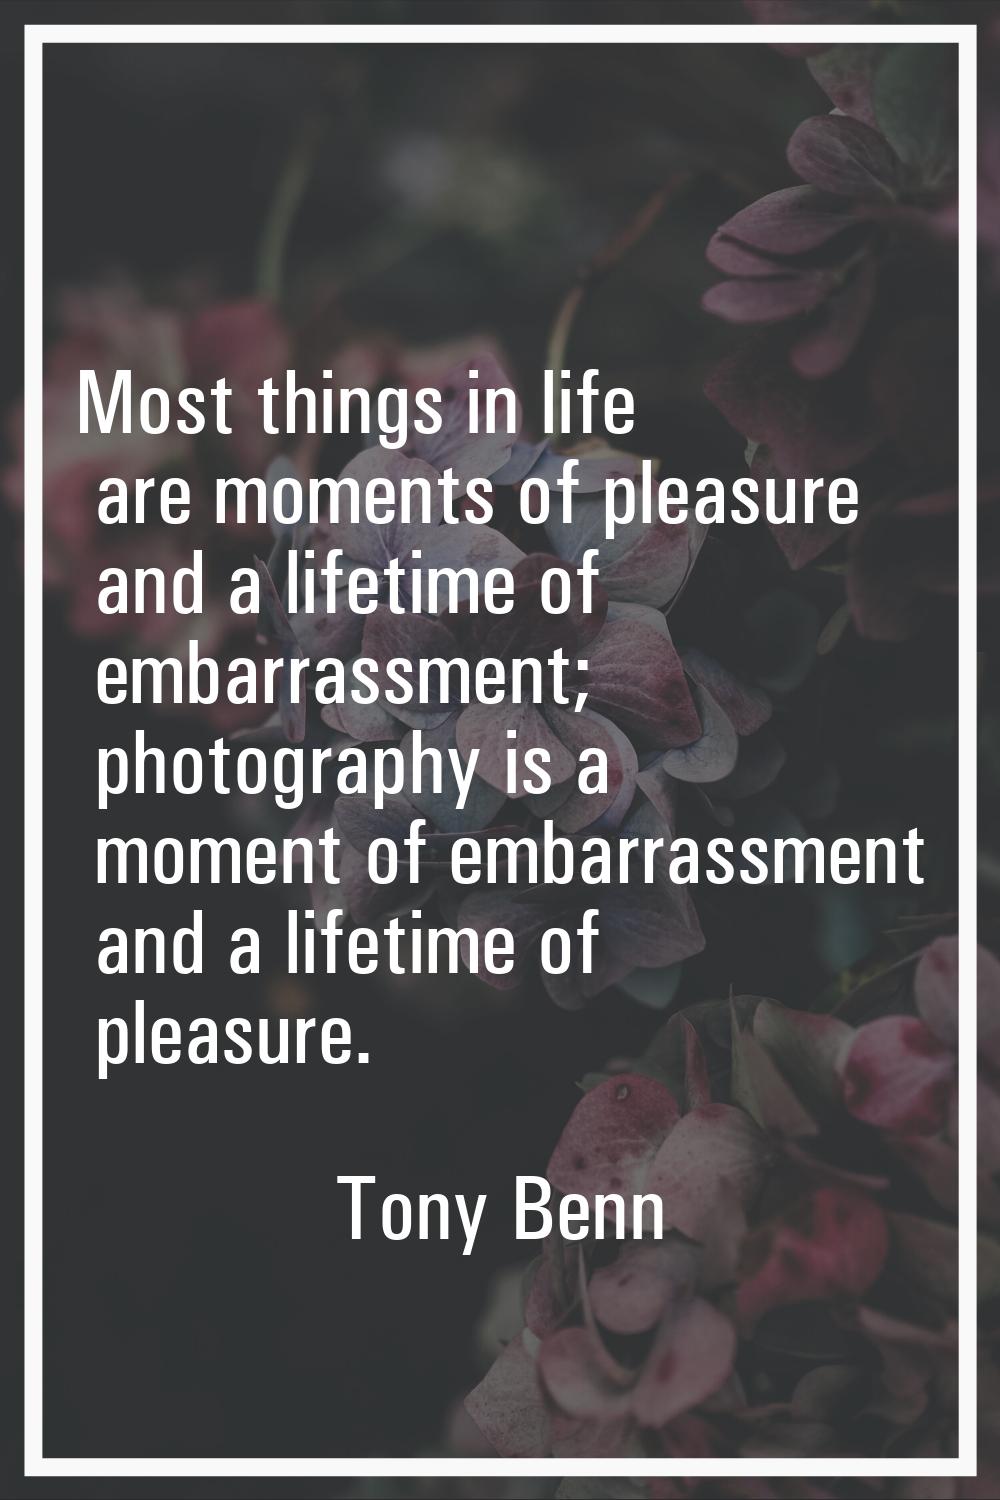 Most things in life are moments of pleasure and a lifetime of embarrassment; photography is a momen